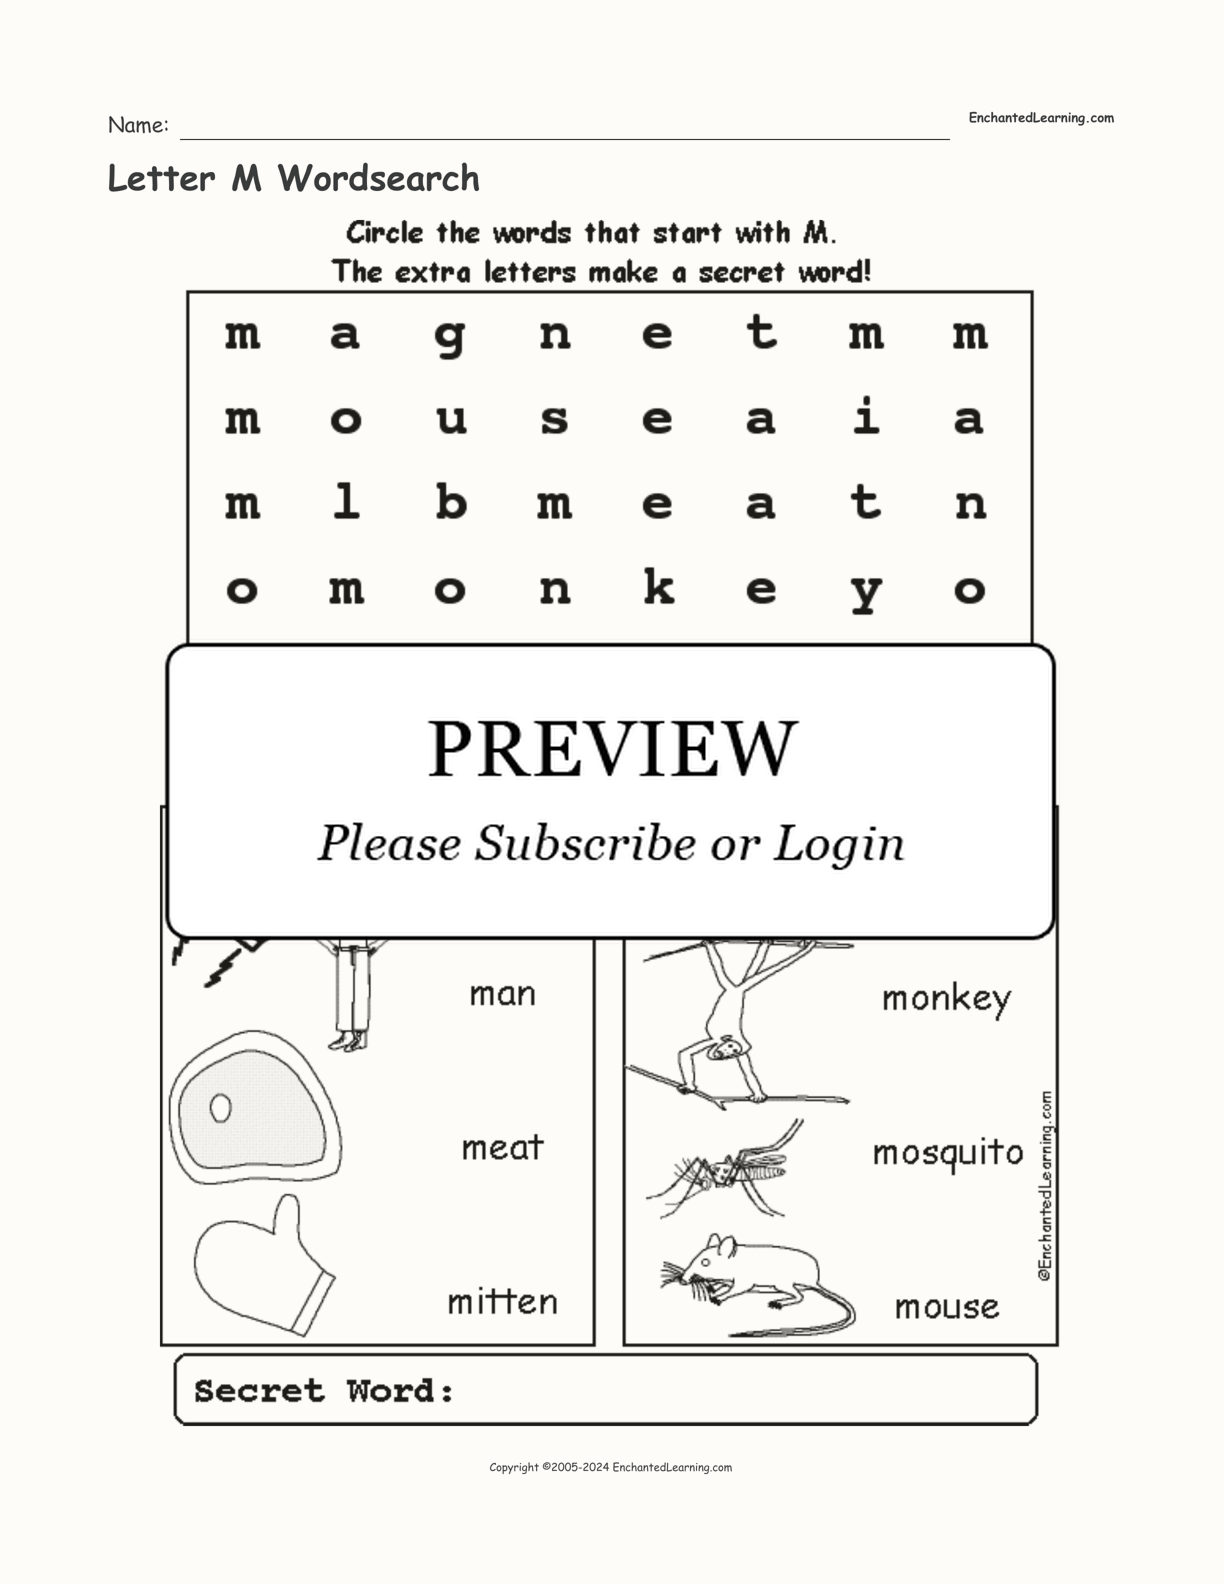 Letter M Wordsearch interactive worksheet page 1